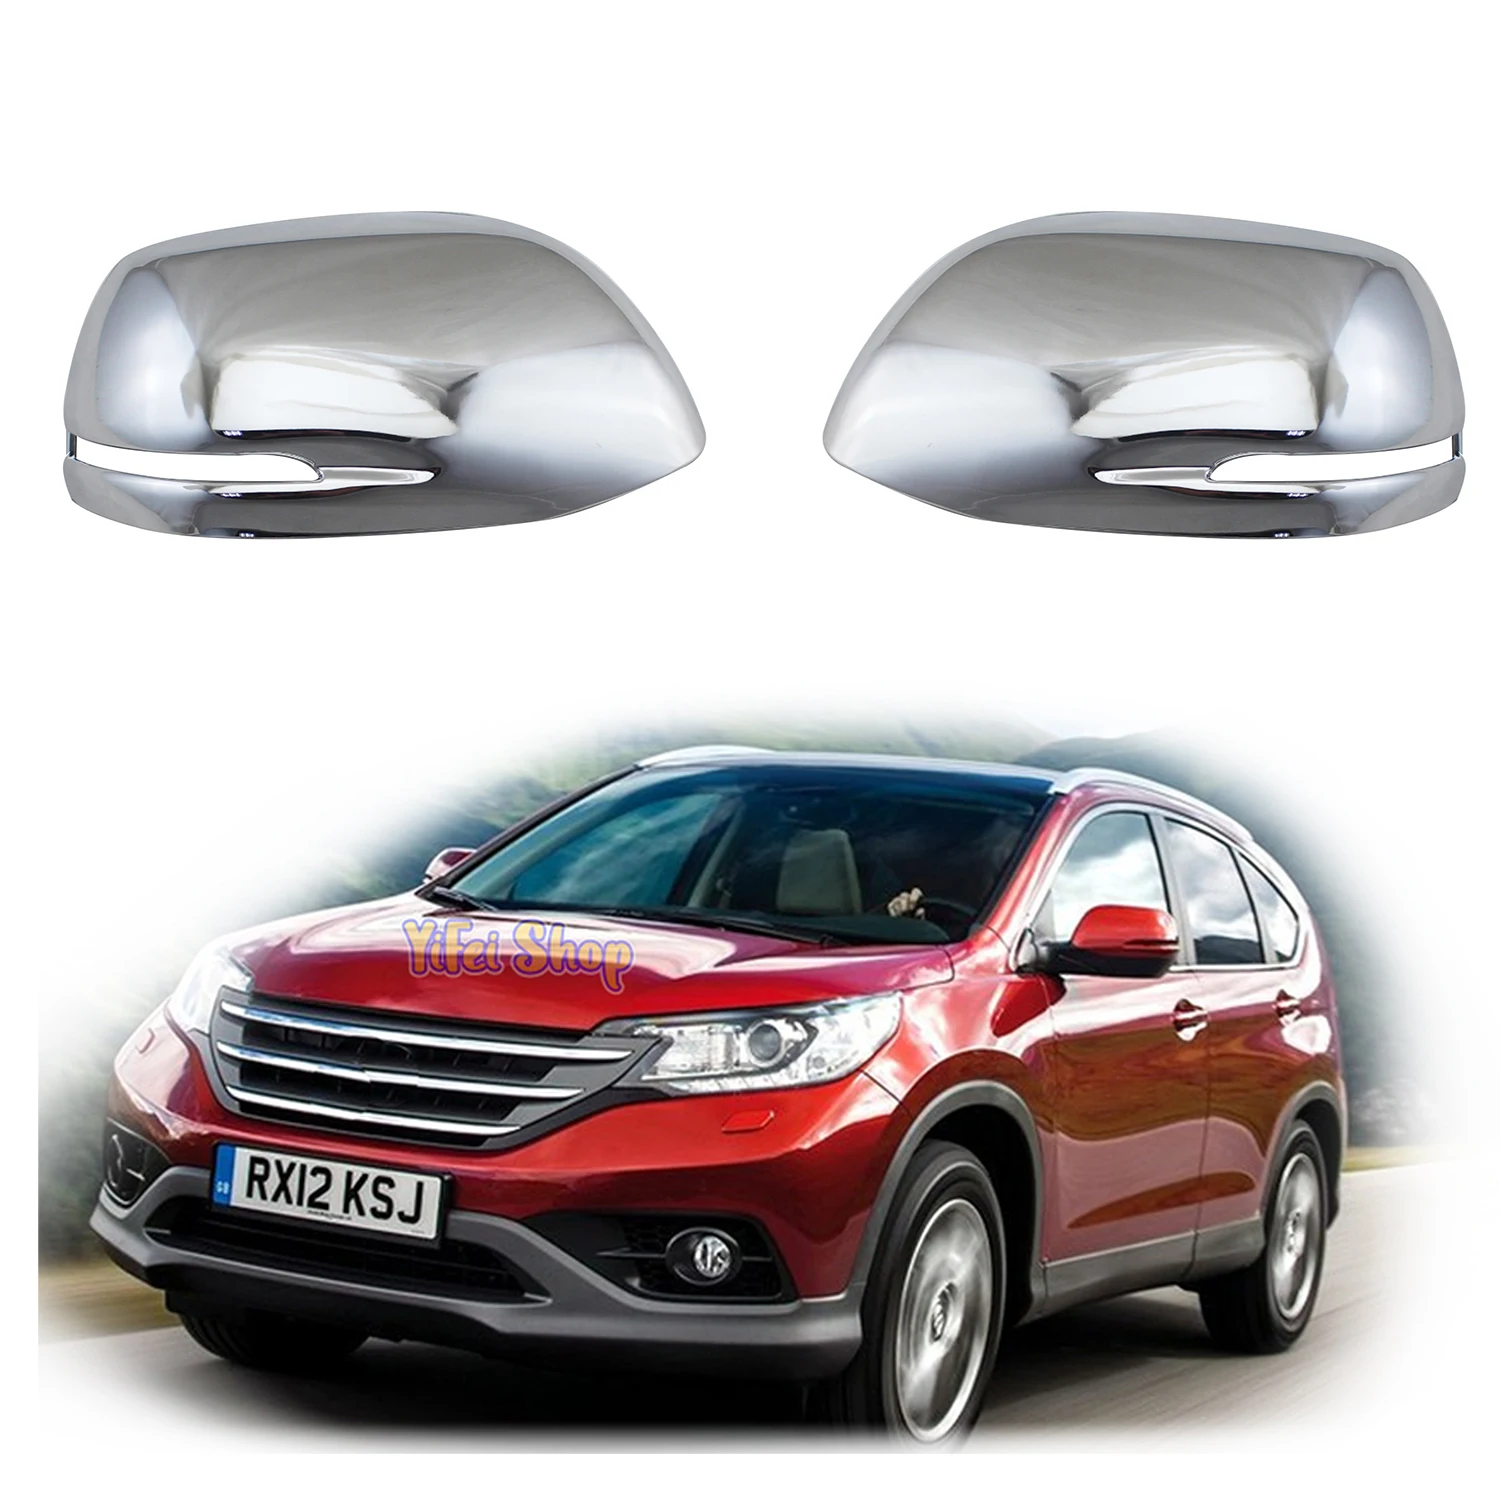 

Yifei 2PCS Car Chrome Rearview Accessories Plated Carbon Door Mirror Cover Trim 2012 2013 2014 2015 2016 For Honda CR-V CRV